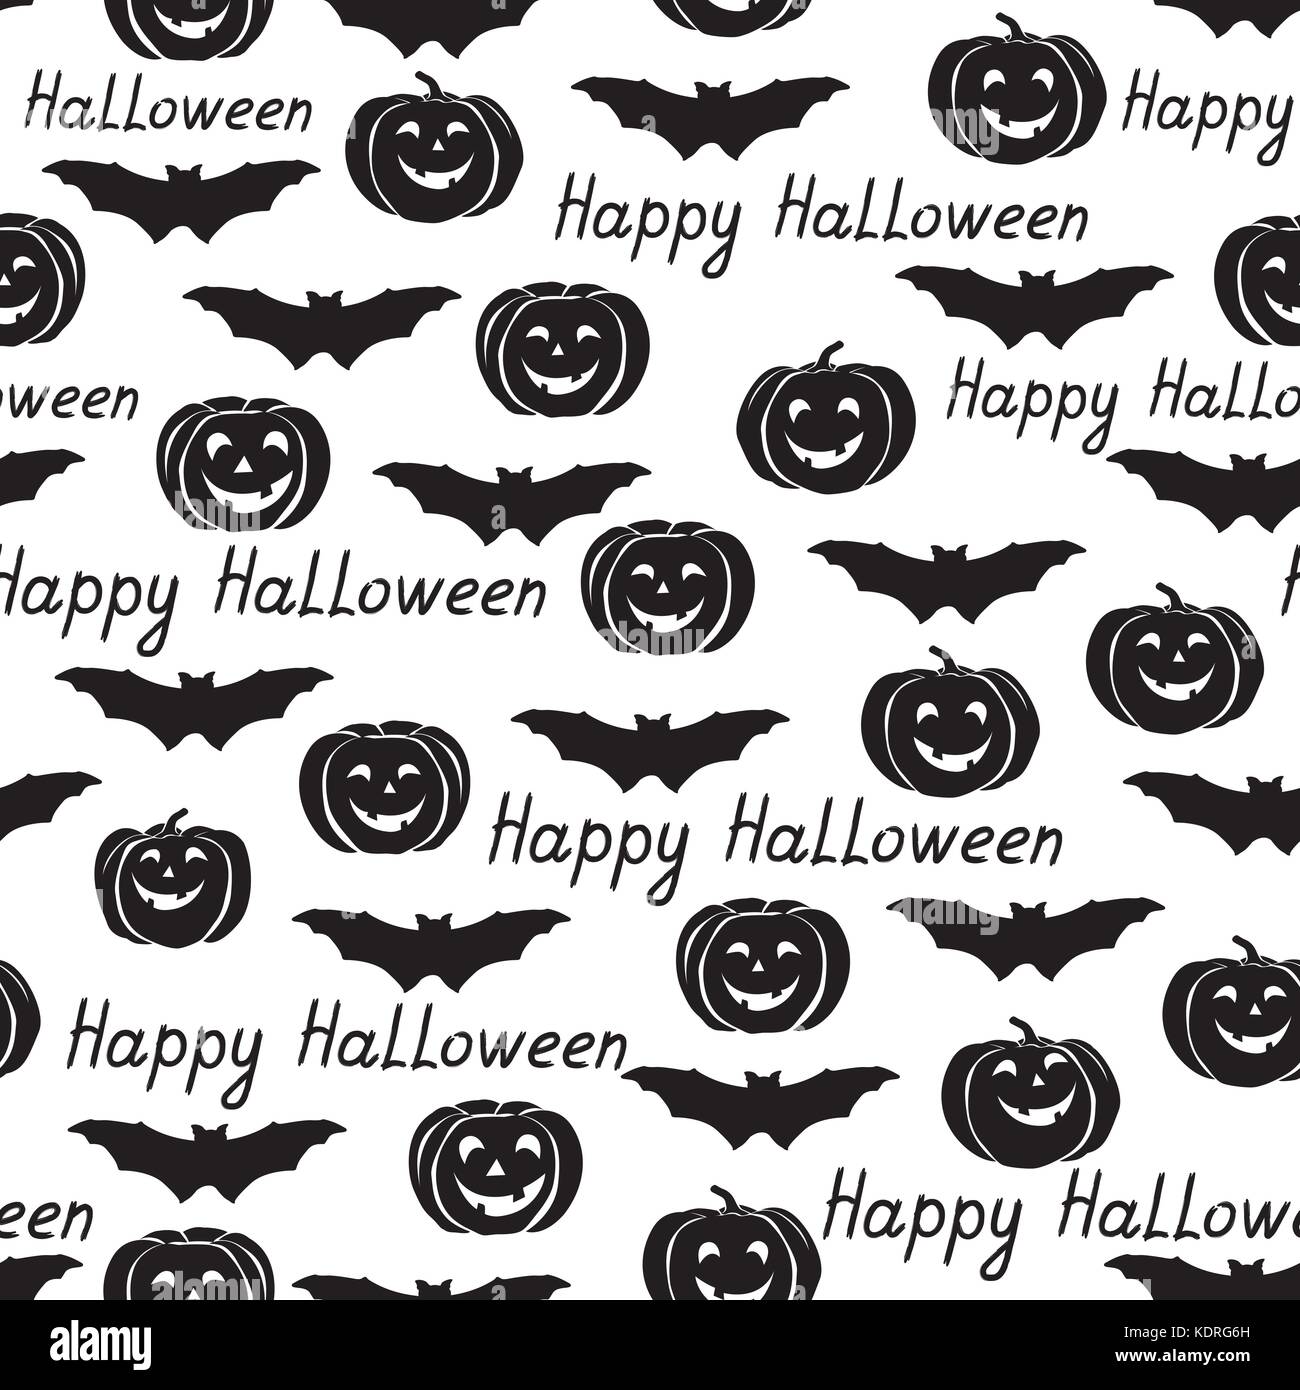 Happy Halloween seamless pattern. Holiday background with bat, pumpkin, lettering Stock Vector